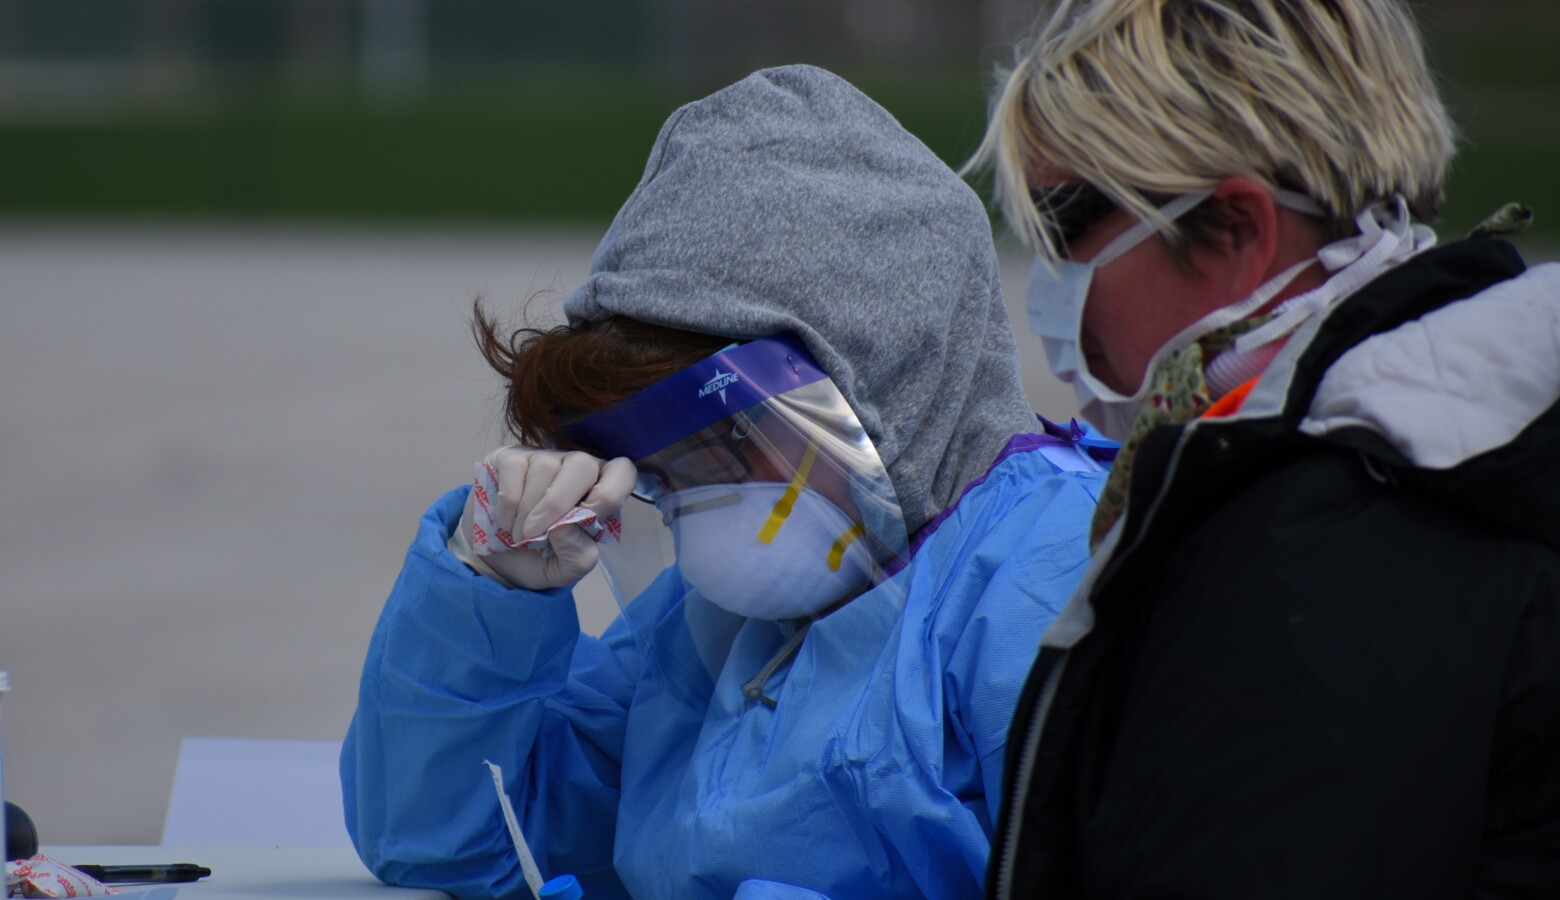 Employees doing COVID-19 testing wear considerable amounts of personal protective equipment. (Justin Hicks/IPB News)